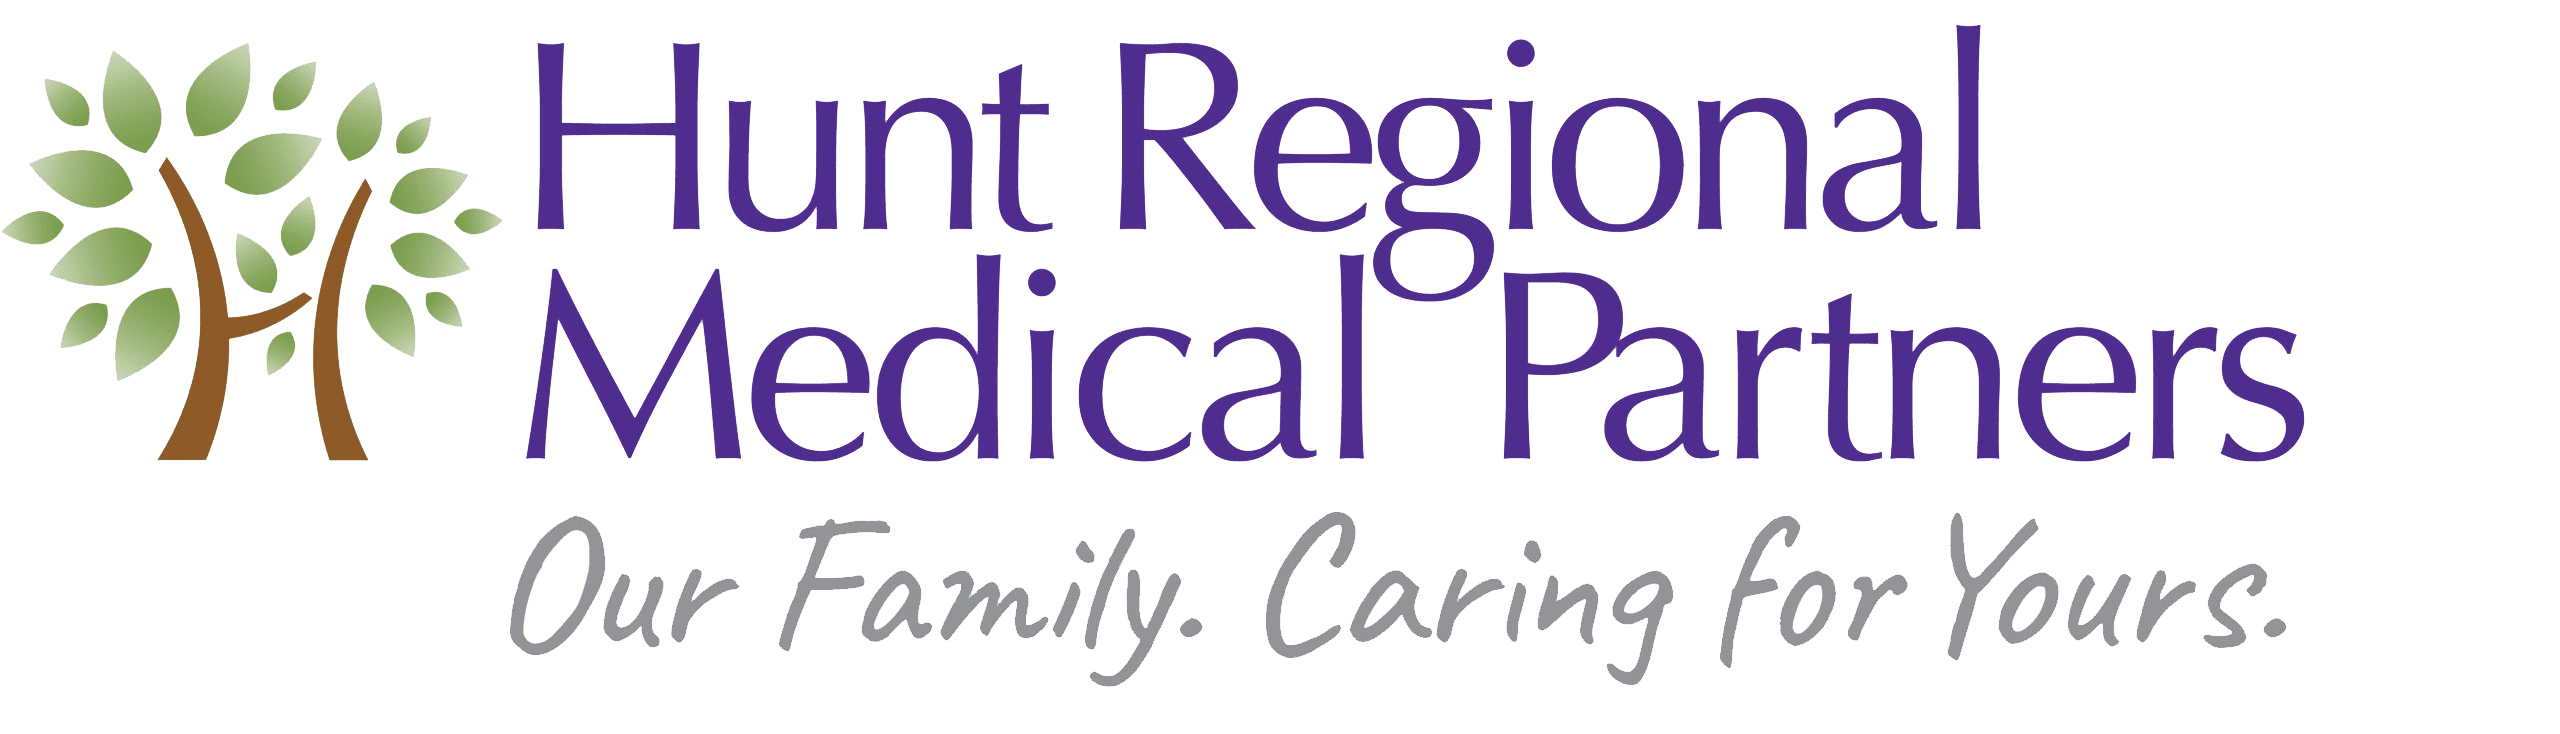 Hunt Regional Medical Partners | Our Family. Caring for Yours.